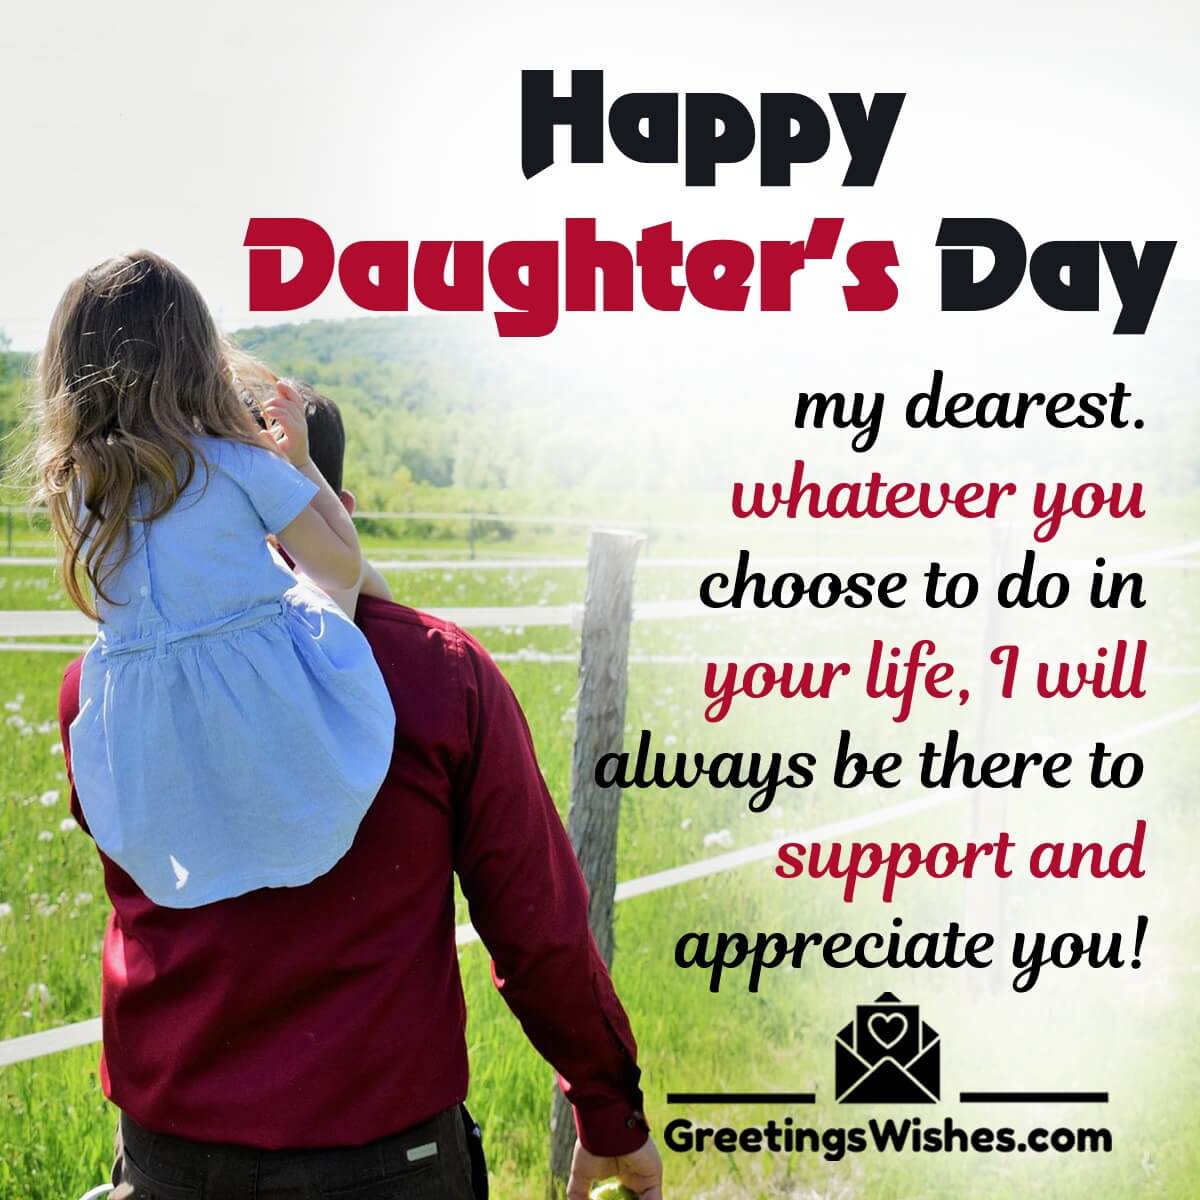 Happy Daughters Day Wish Image